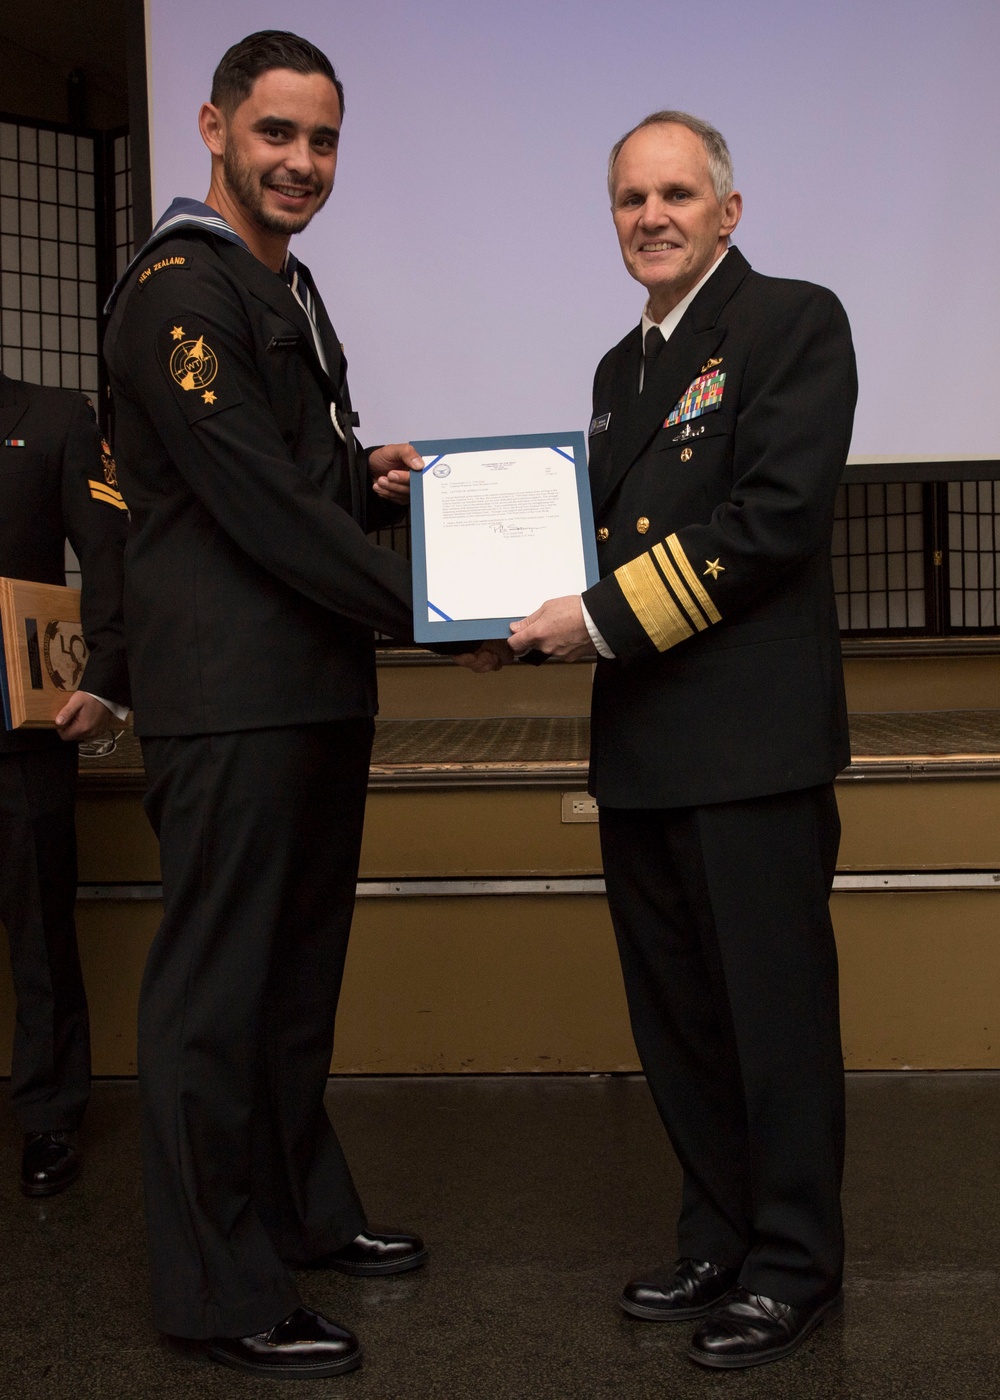 2018 7th Fleet Sailor of the Year Welcomes Royal New Zealand Navy Sailors